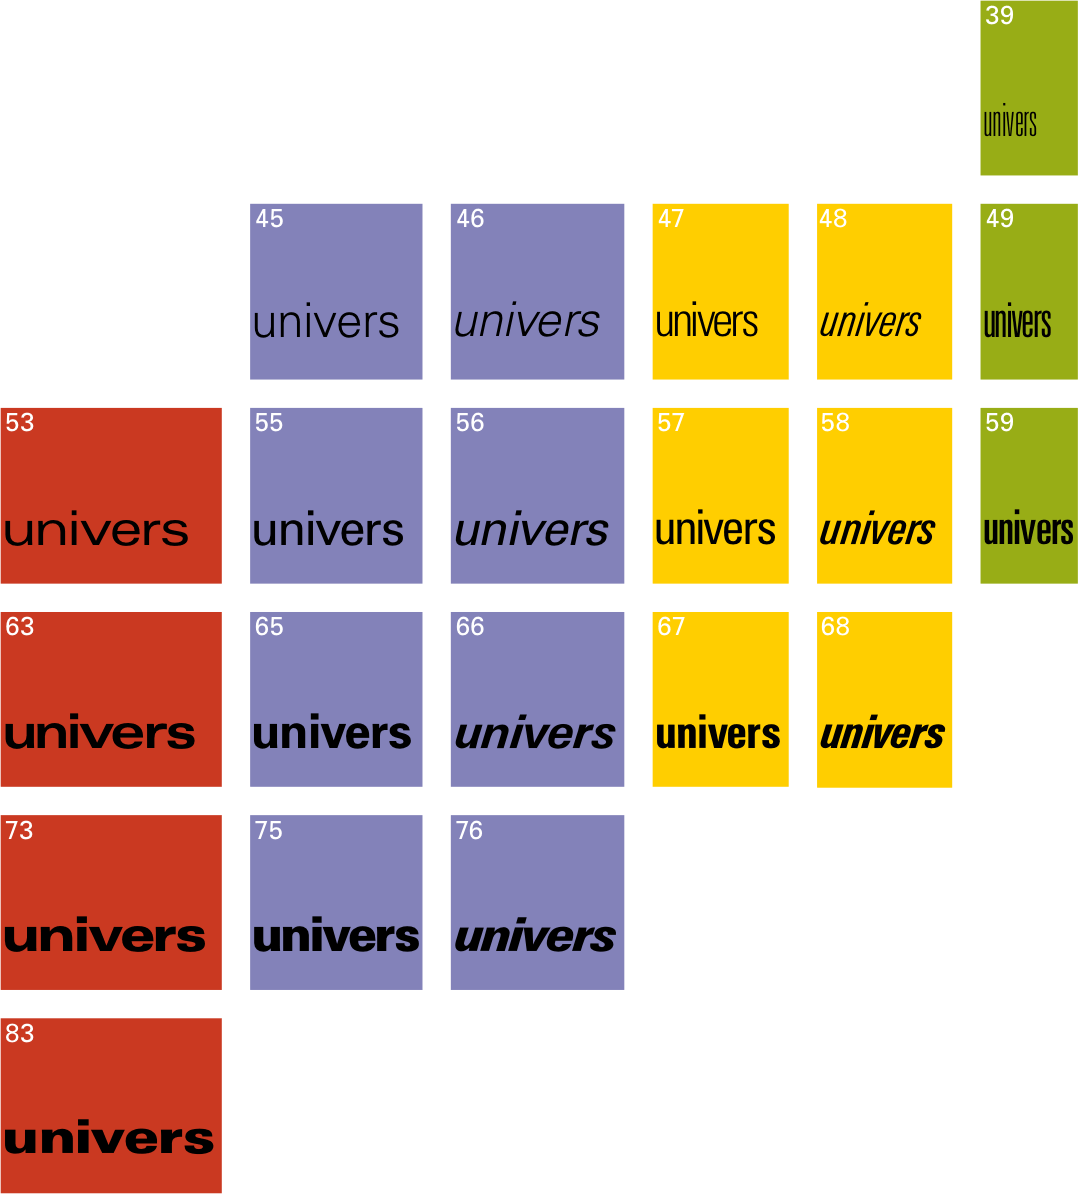 The iconic visualisation of the [Univers®](/superfamilies/univers) [typeface family](/glossary#family) with its revolutionary numeric system identifying the different [styles](/glossary#style), 1954. The first digit represents the [weight](/glossary#weight), the second the [width](/glossary#width). Odd numbers define [roman](/glossary#roman) variants, even numbers [obliques](/glossary#oblique).